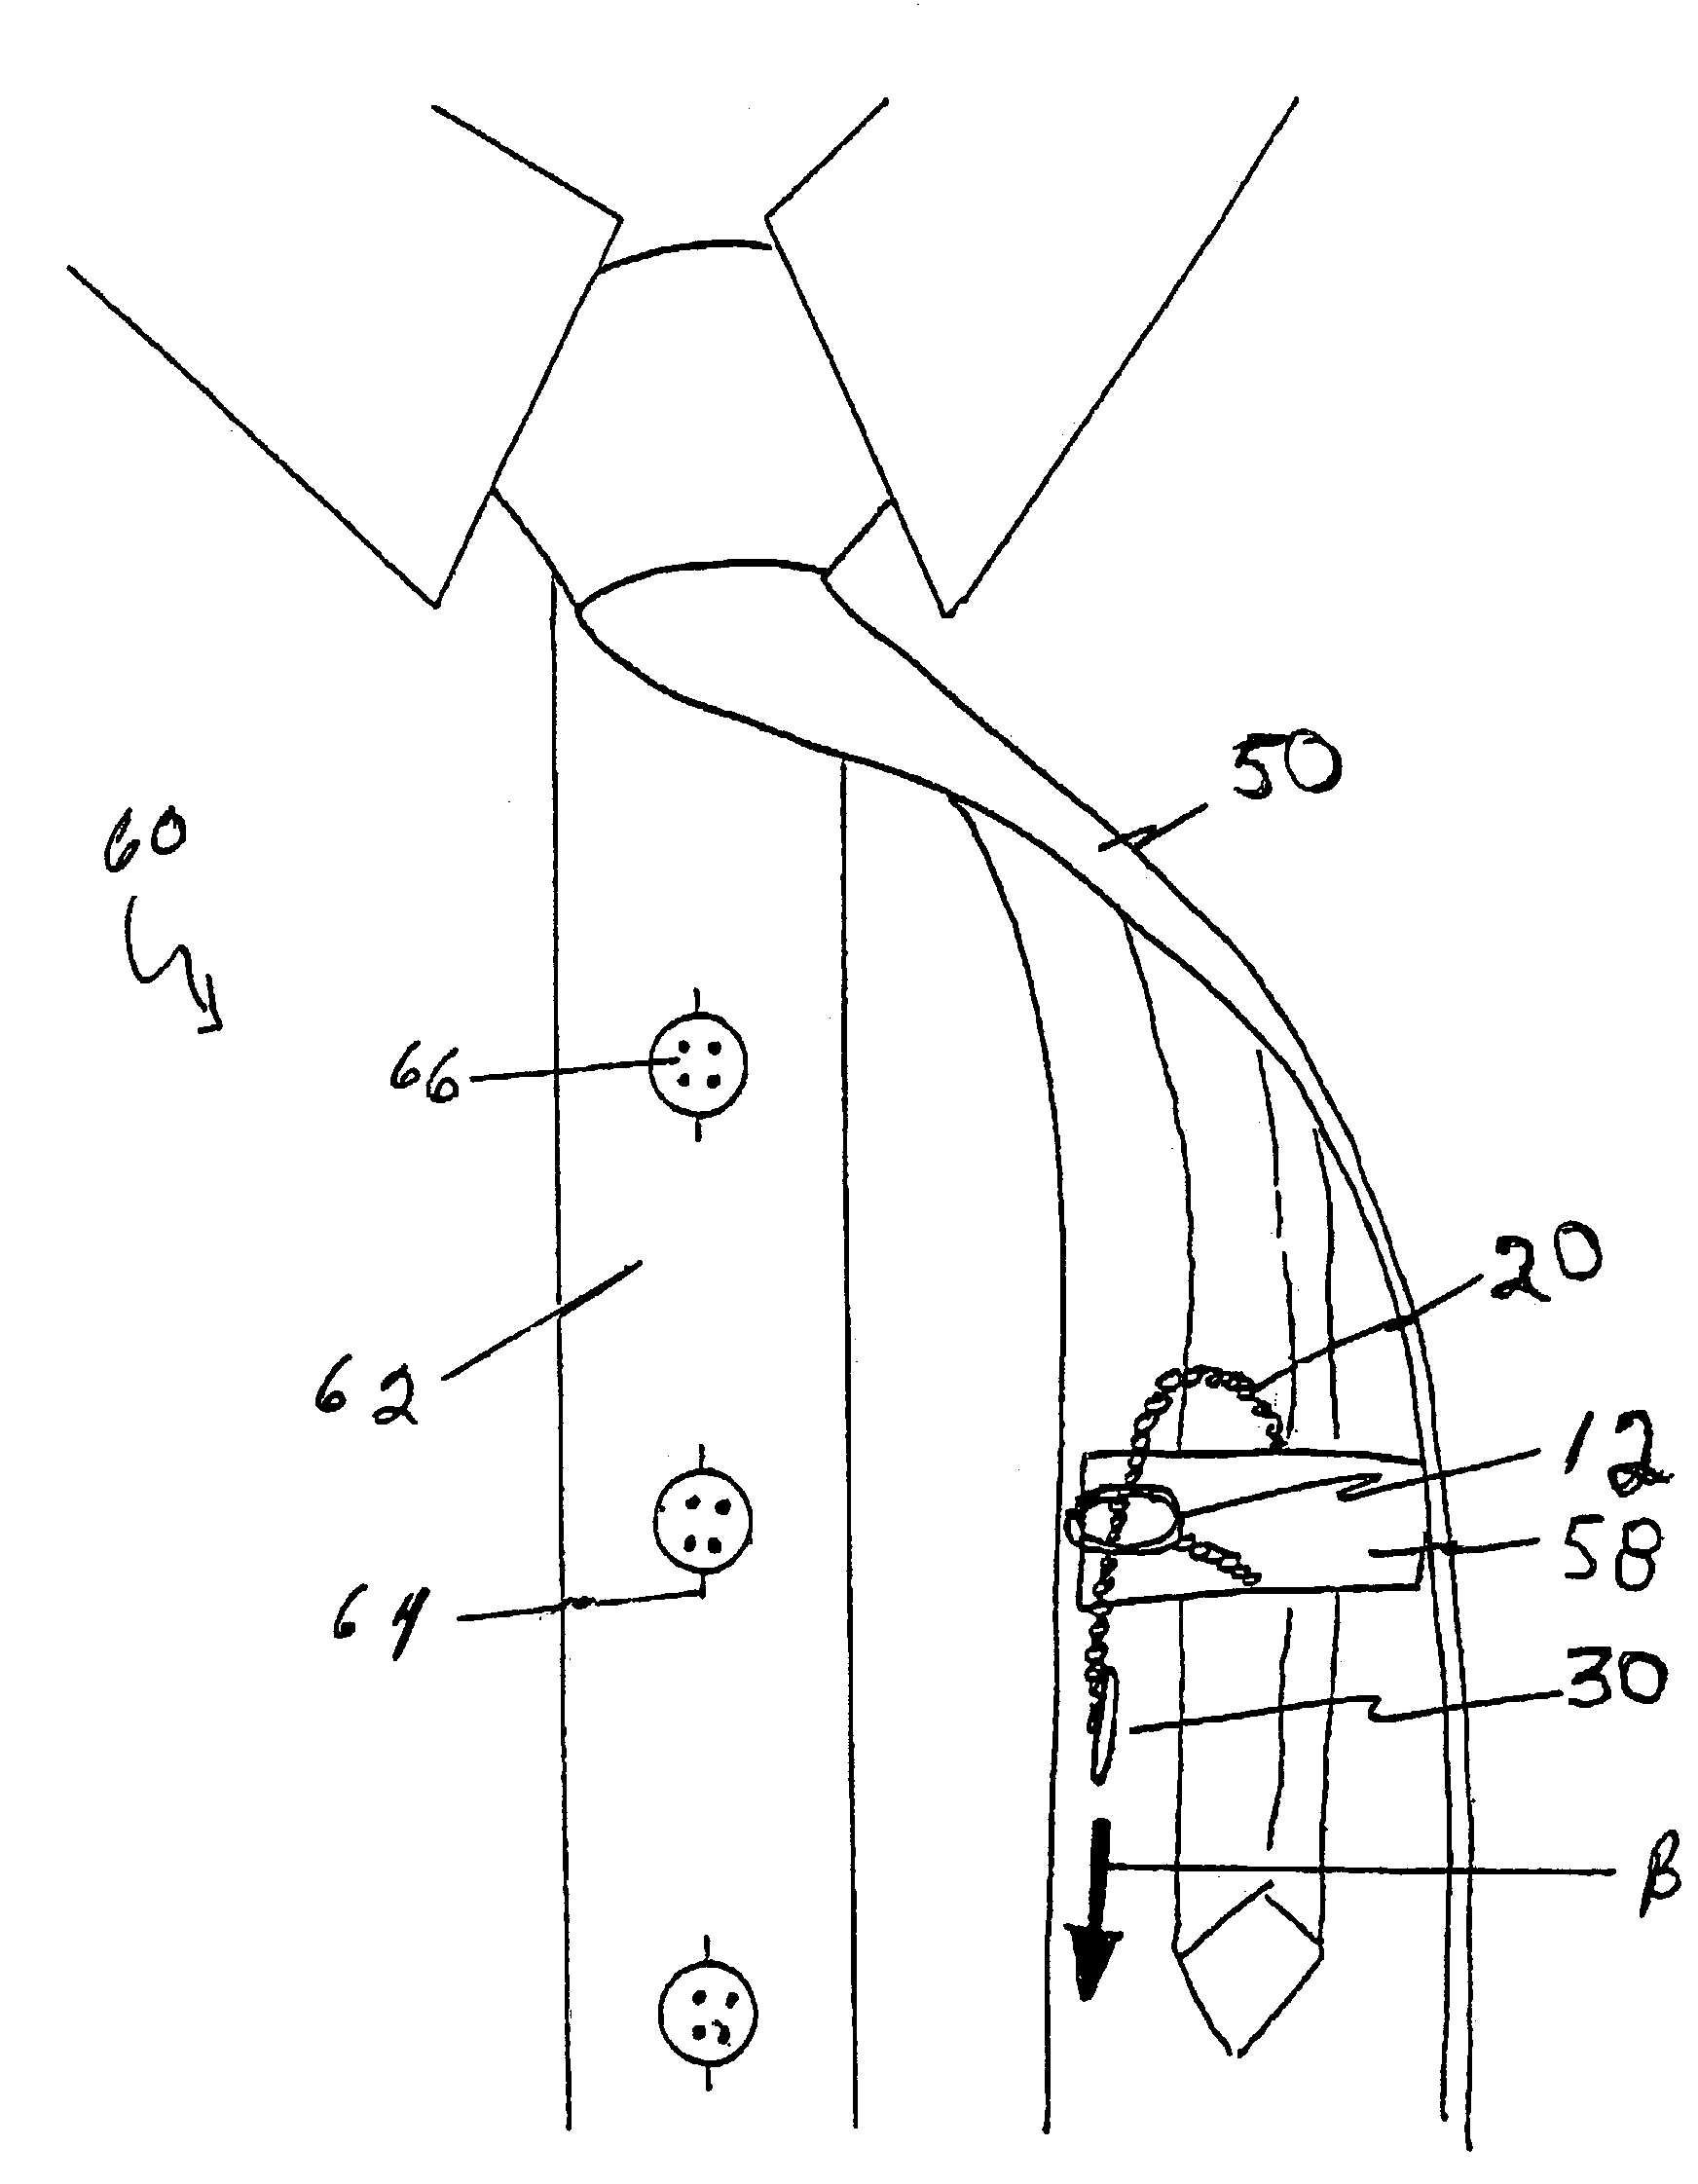 Device and method for securing a necktie